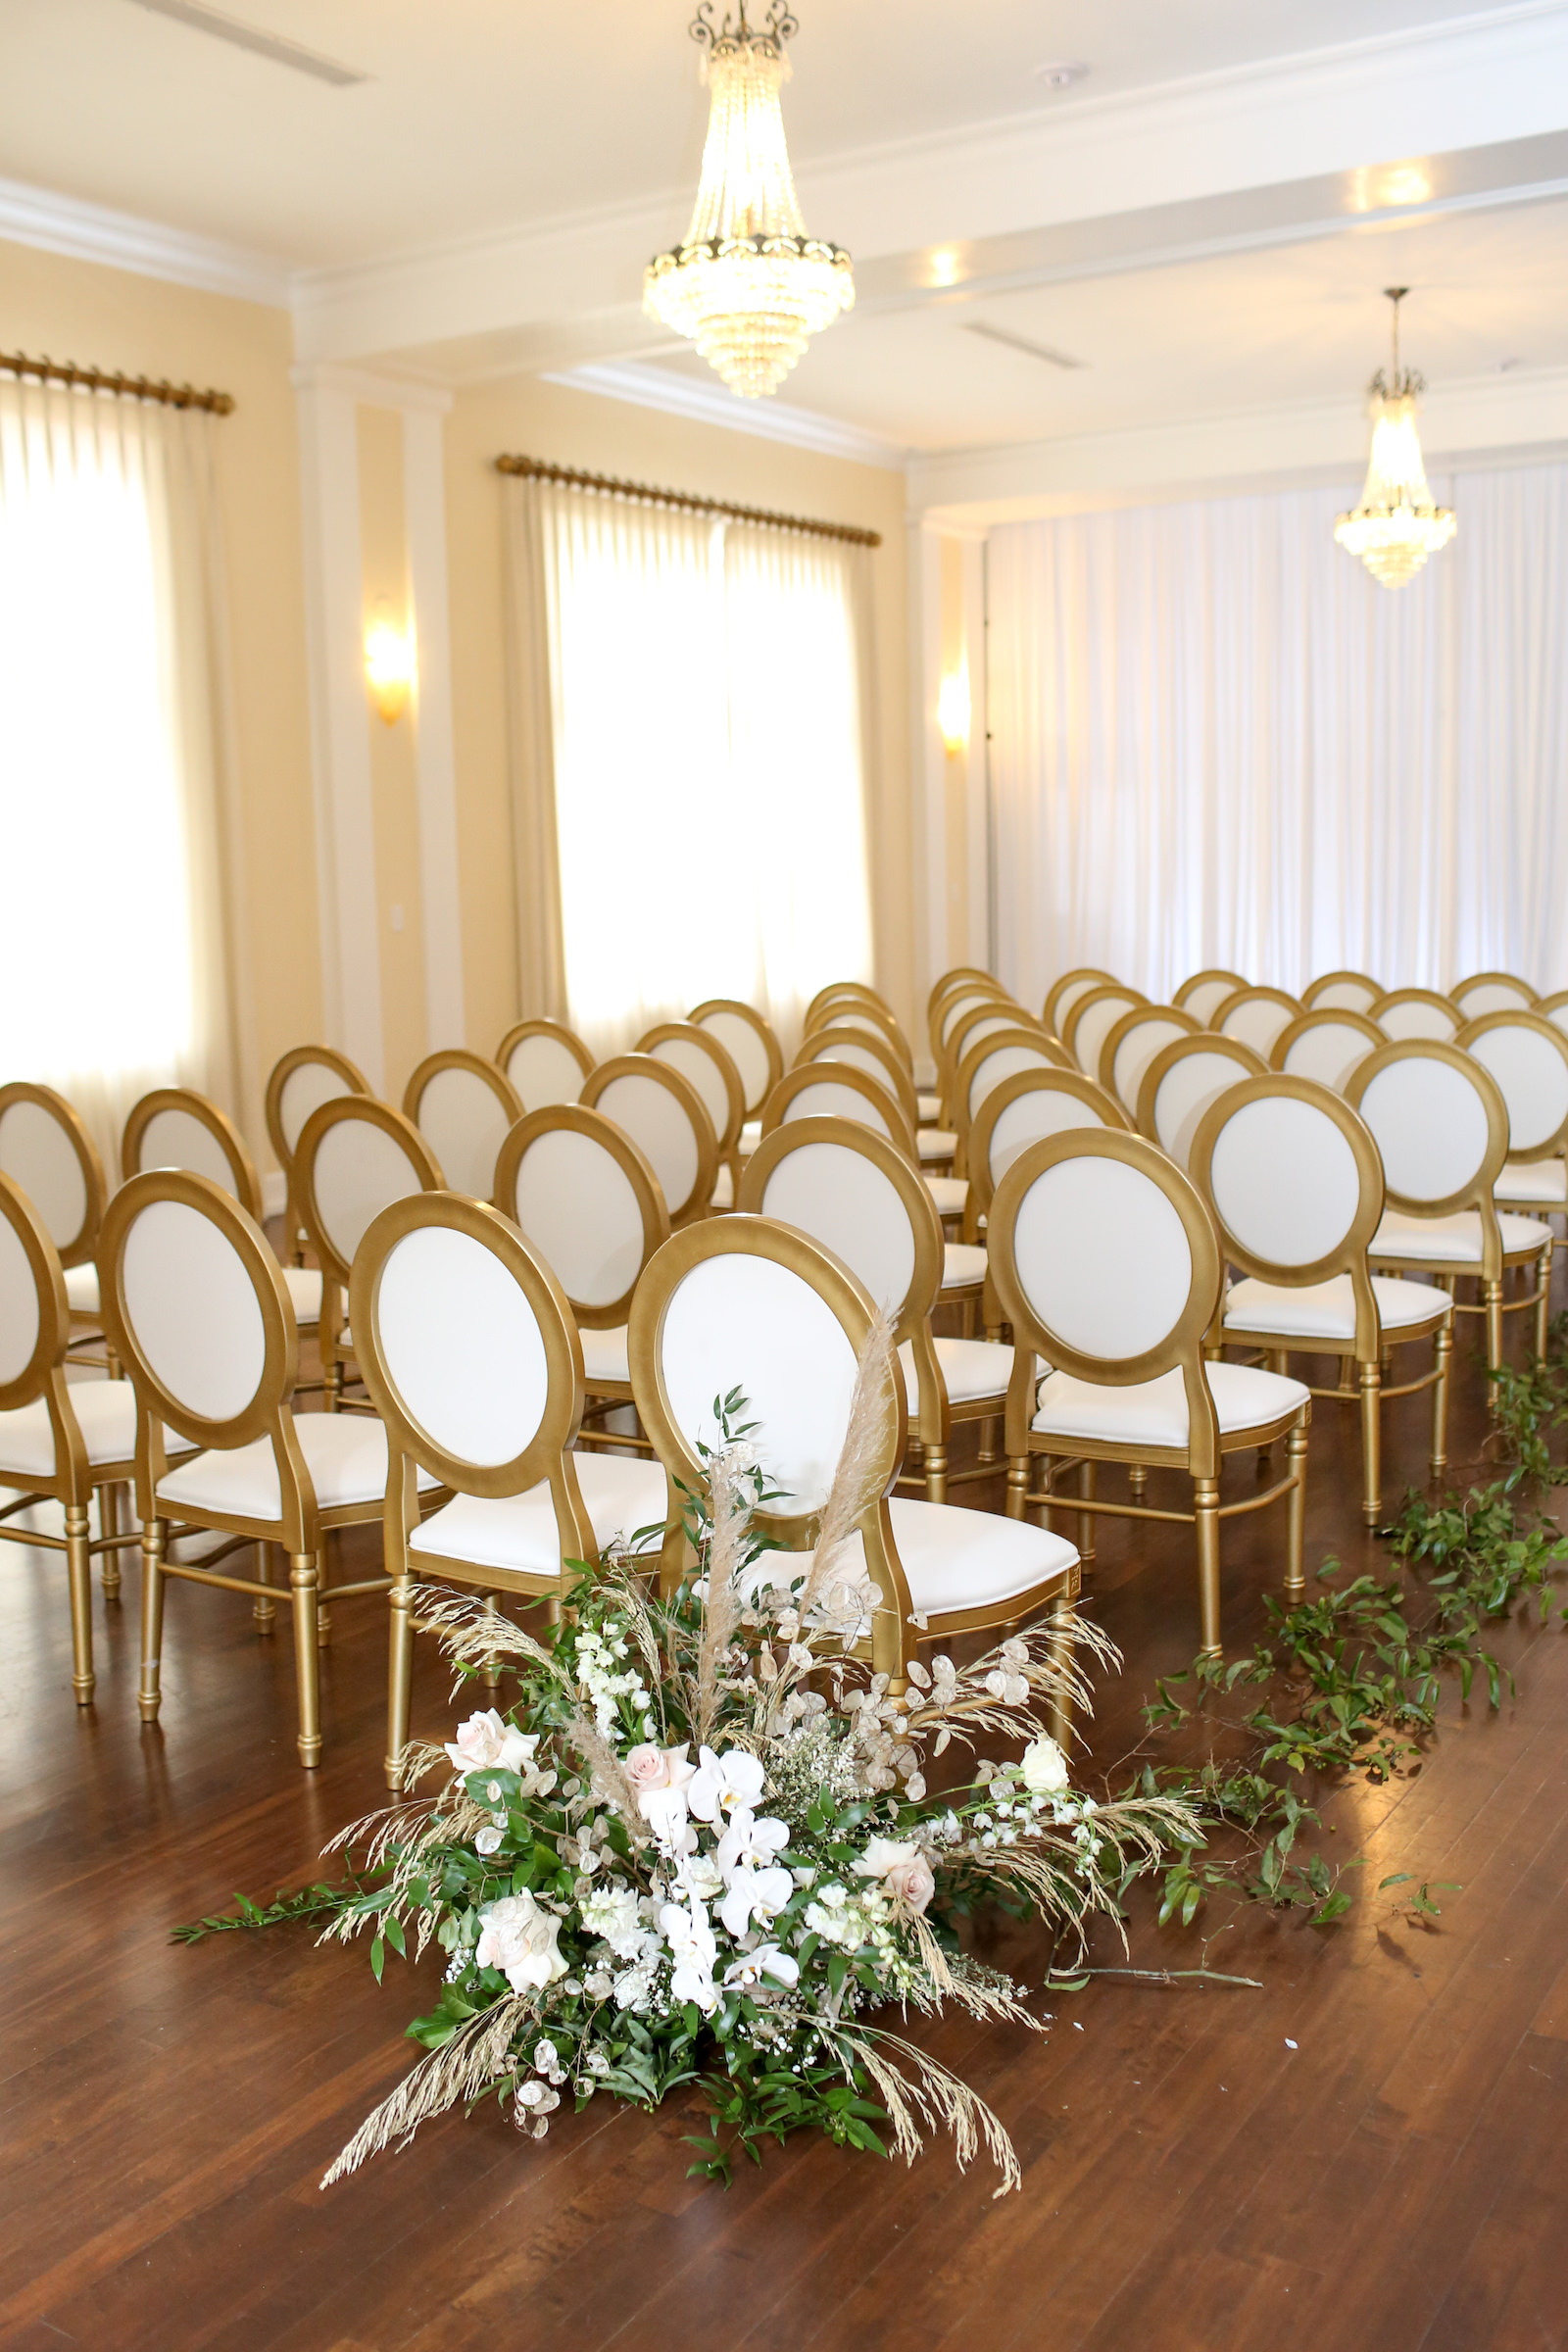 Romantic Indoor Garden Ceremony with King Louis Chairs and White and Greenery Florals | Kate Ryan Event Rentals | Photographer Lifelong Photography Studio